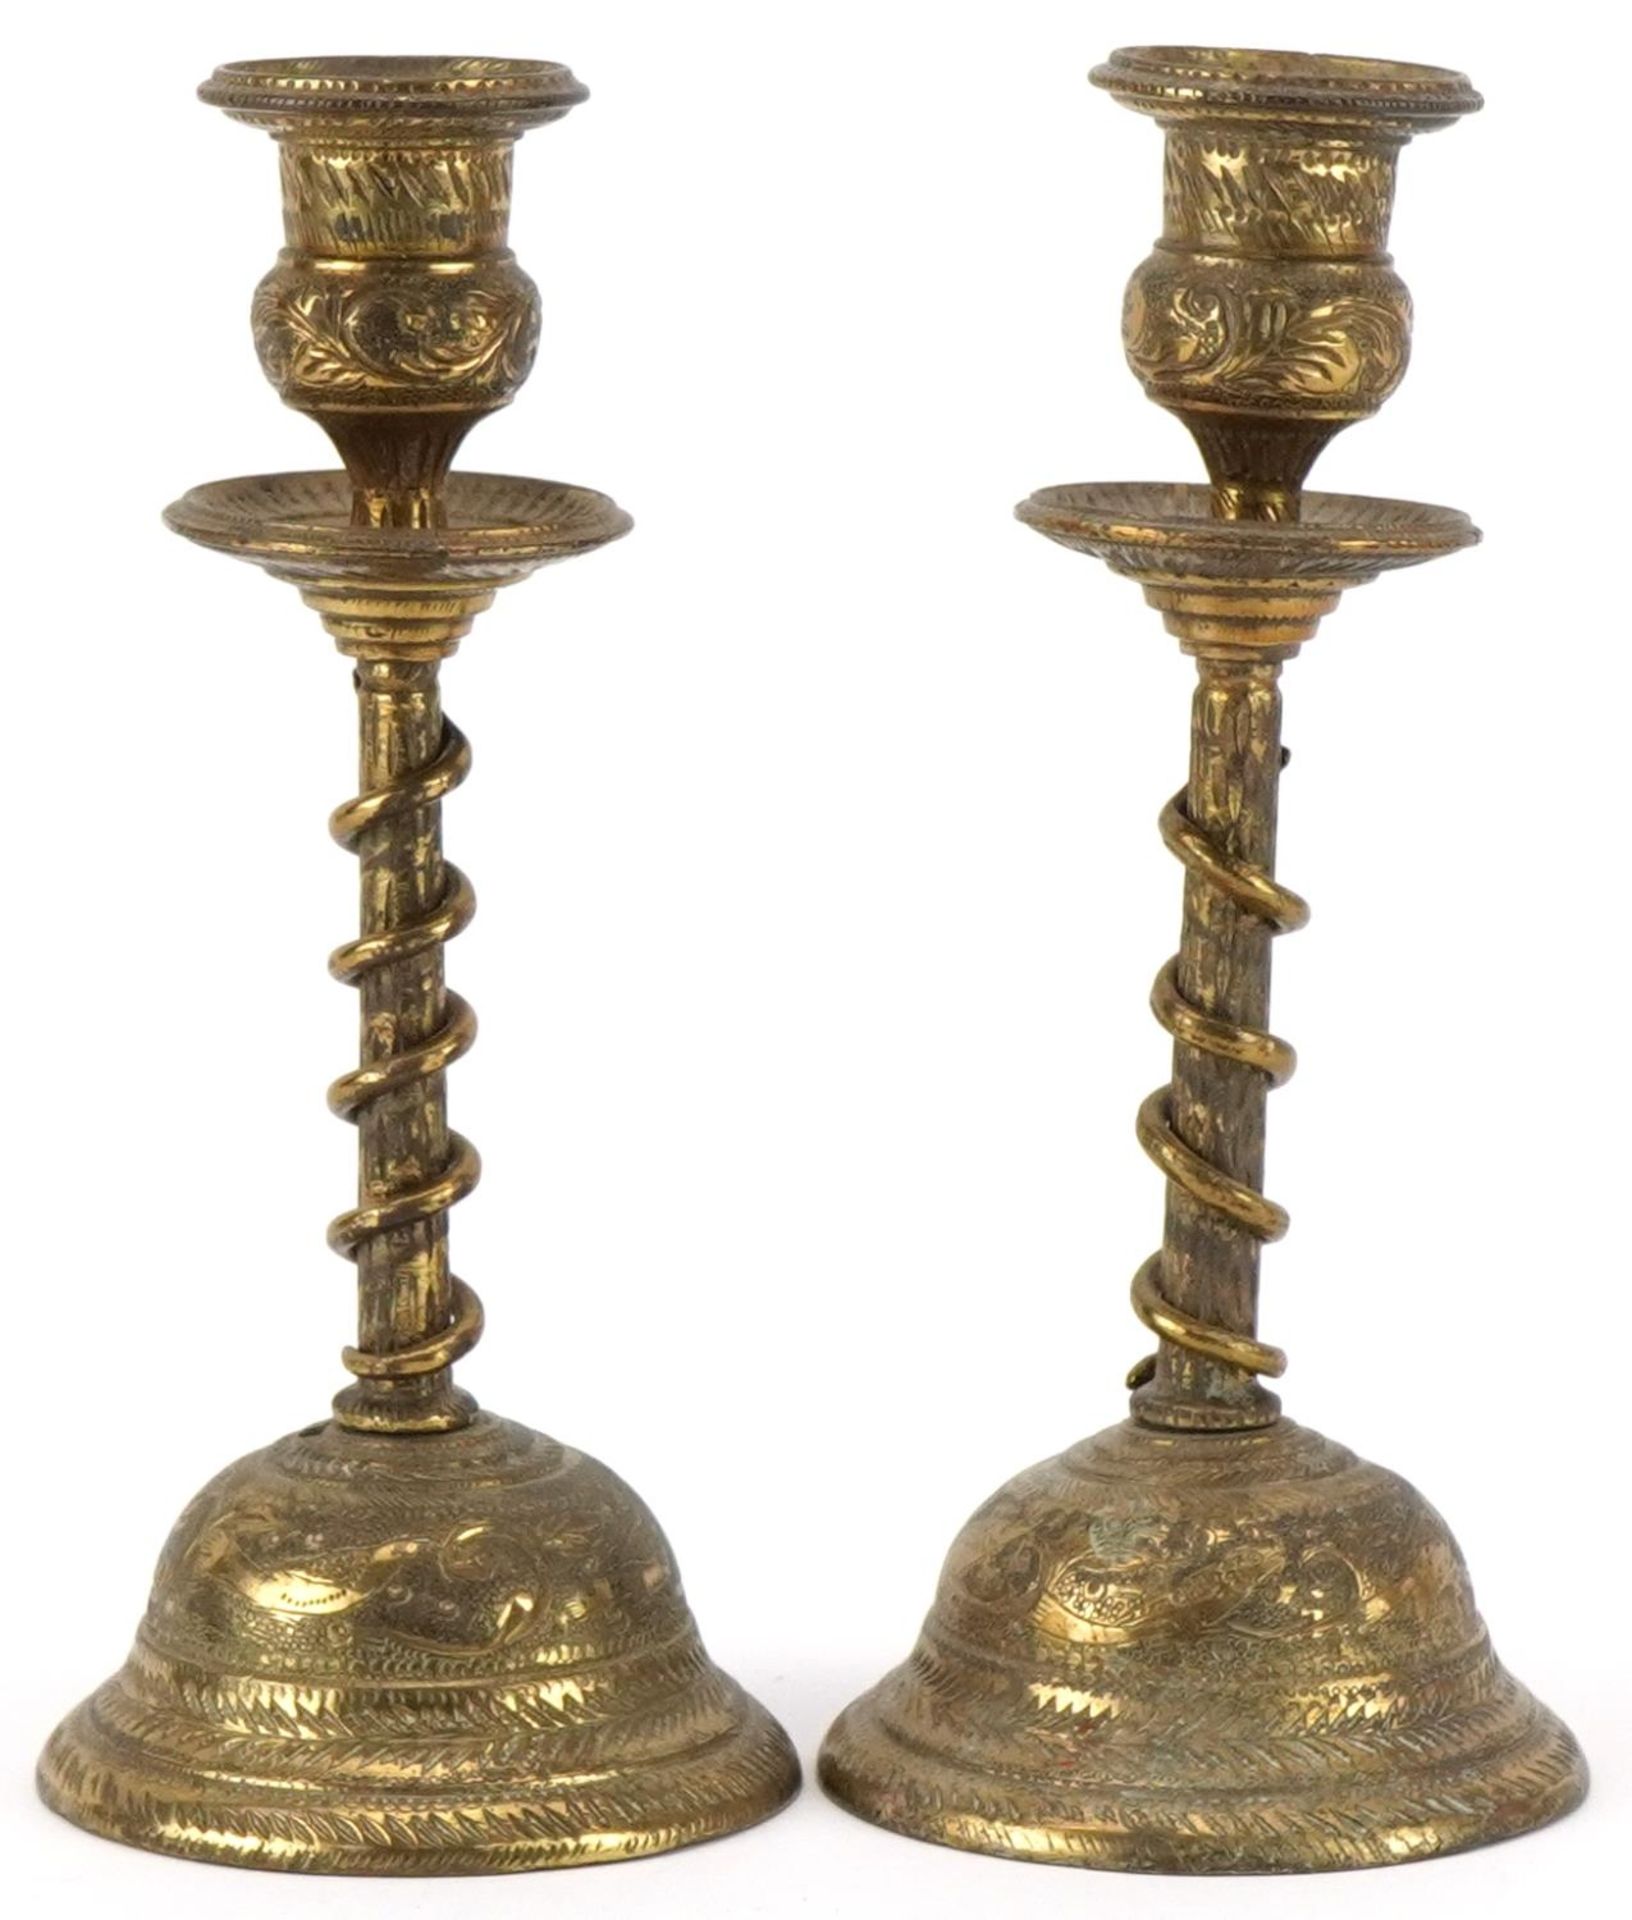 Pair of Indian brass serpent candlesticks engraved with flowers and mythical birds, each 18cm high - Bild 2 aus 4